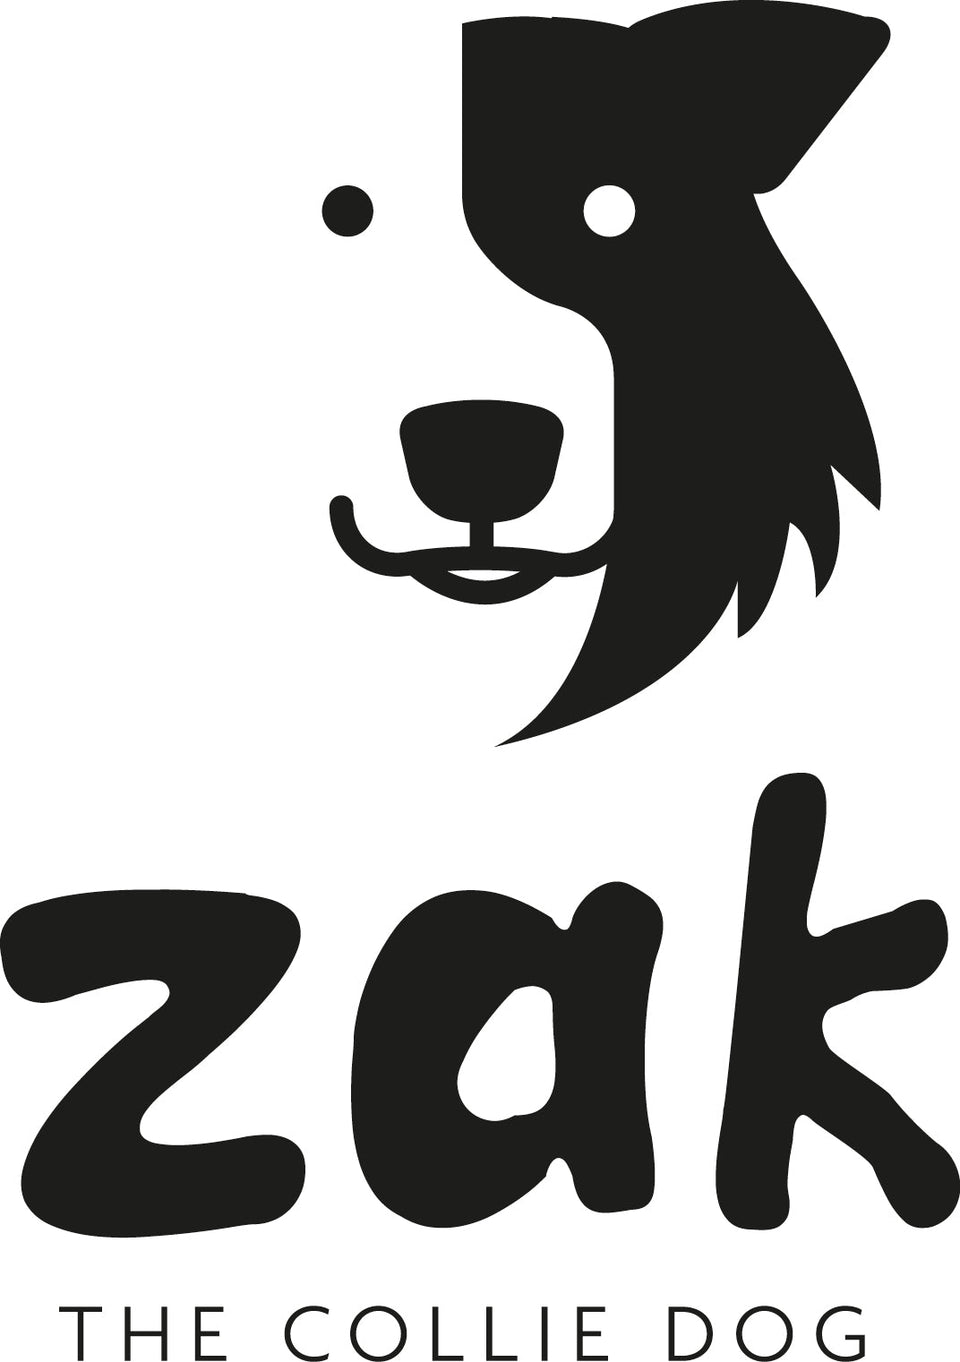 Unisex T-shirts - 'Zak & Co' Collection - Organically Made by Earthpositive™